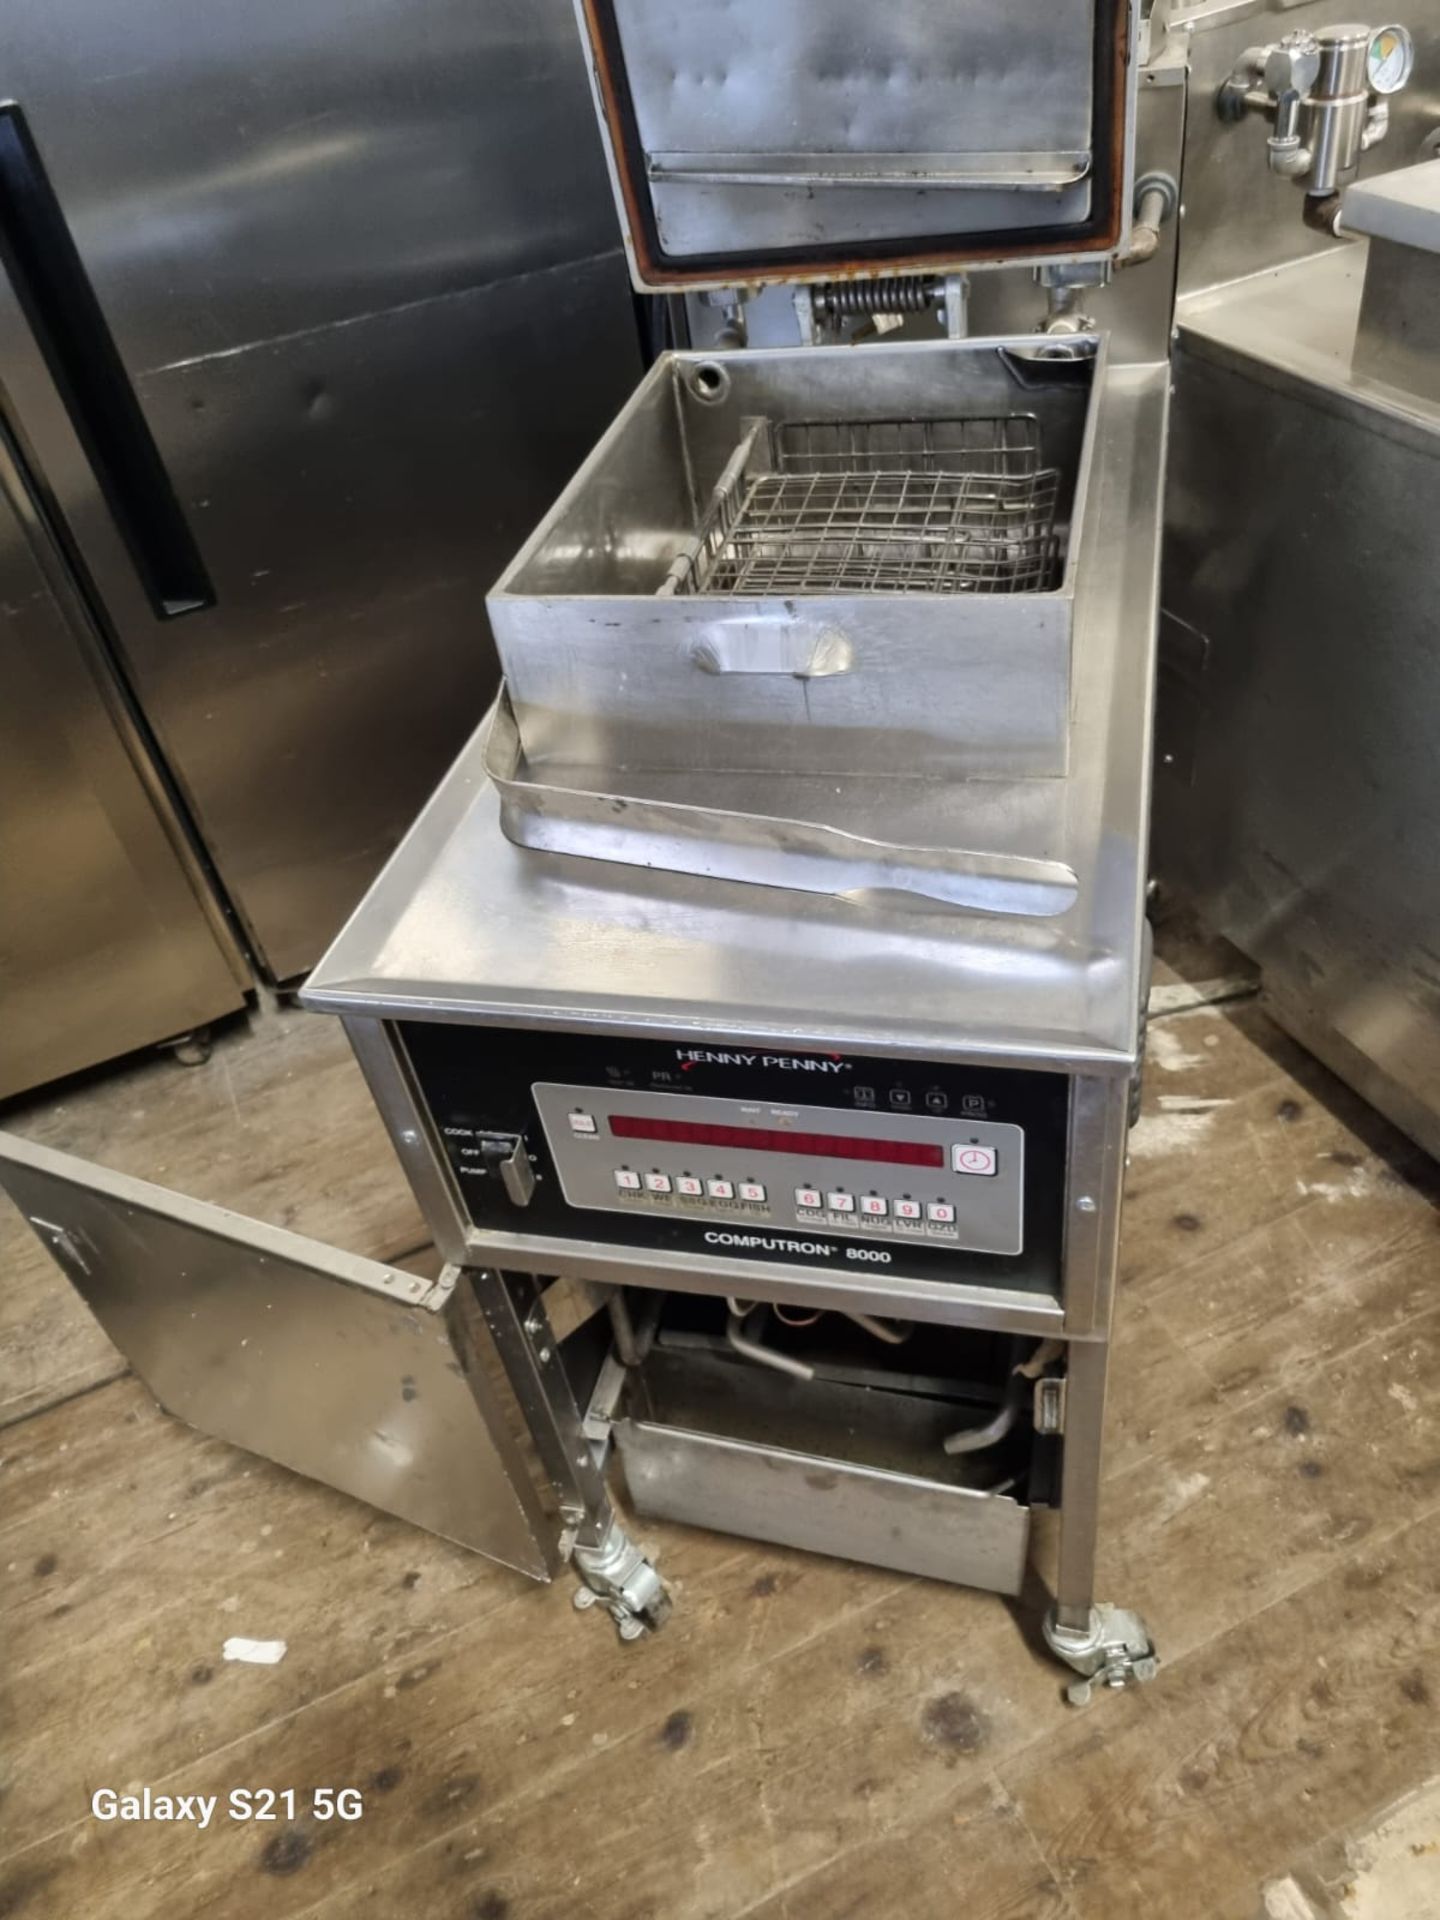 HENNY PENNY COMPUTEON 8000 GAS PRESSURE FRYER - FULLY SERVICED AND TESTED - ALL ORIGINAL PARTS  - Image 7 of 8